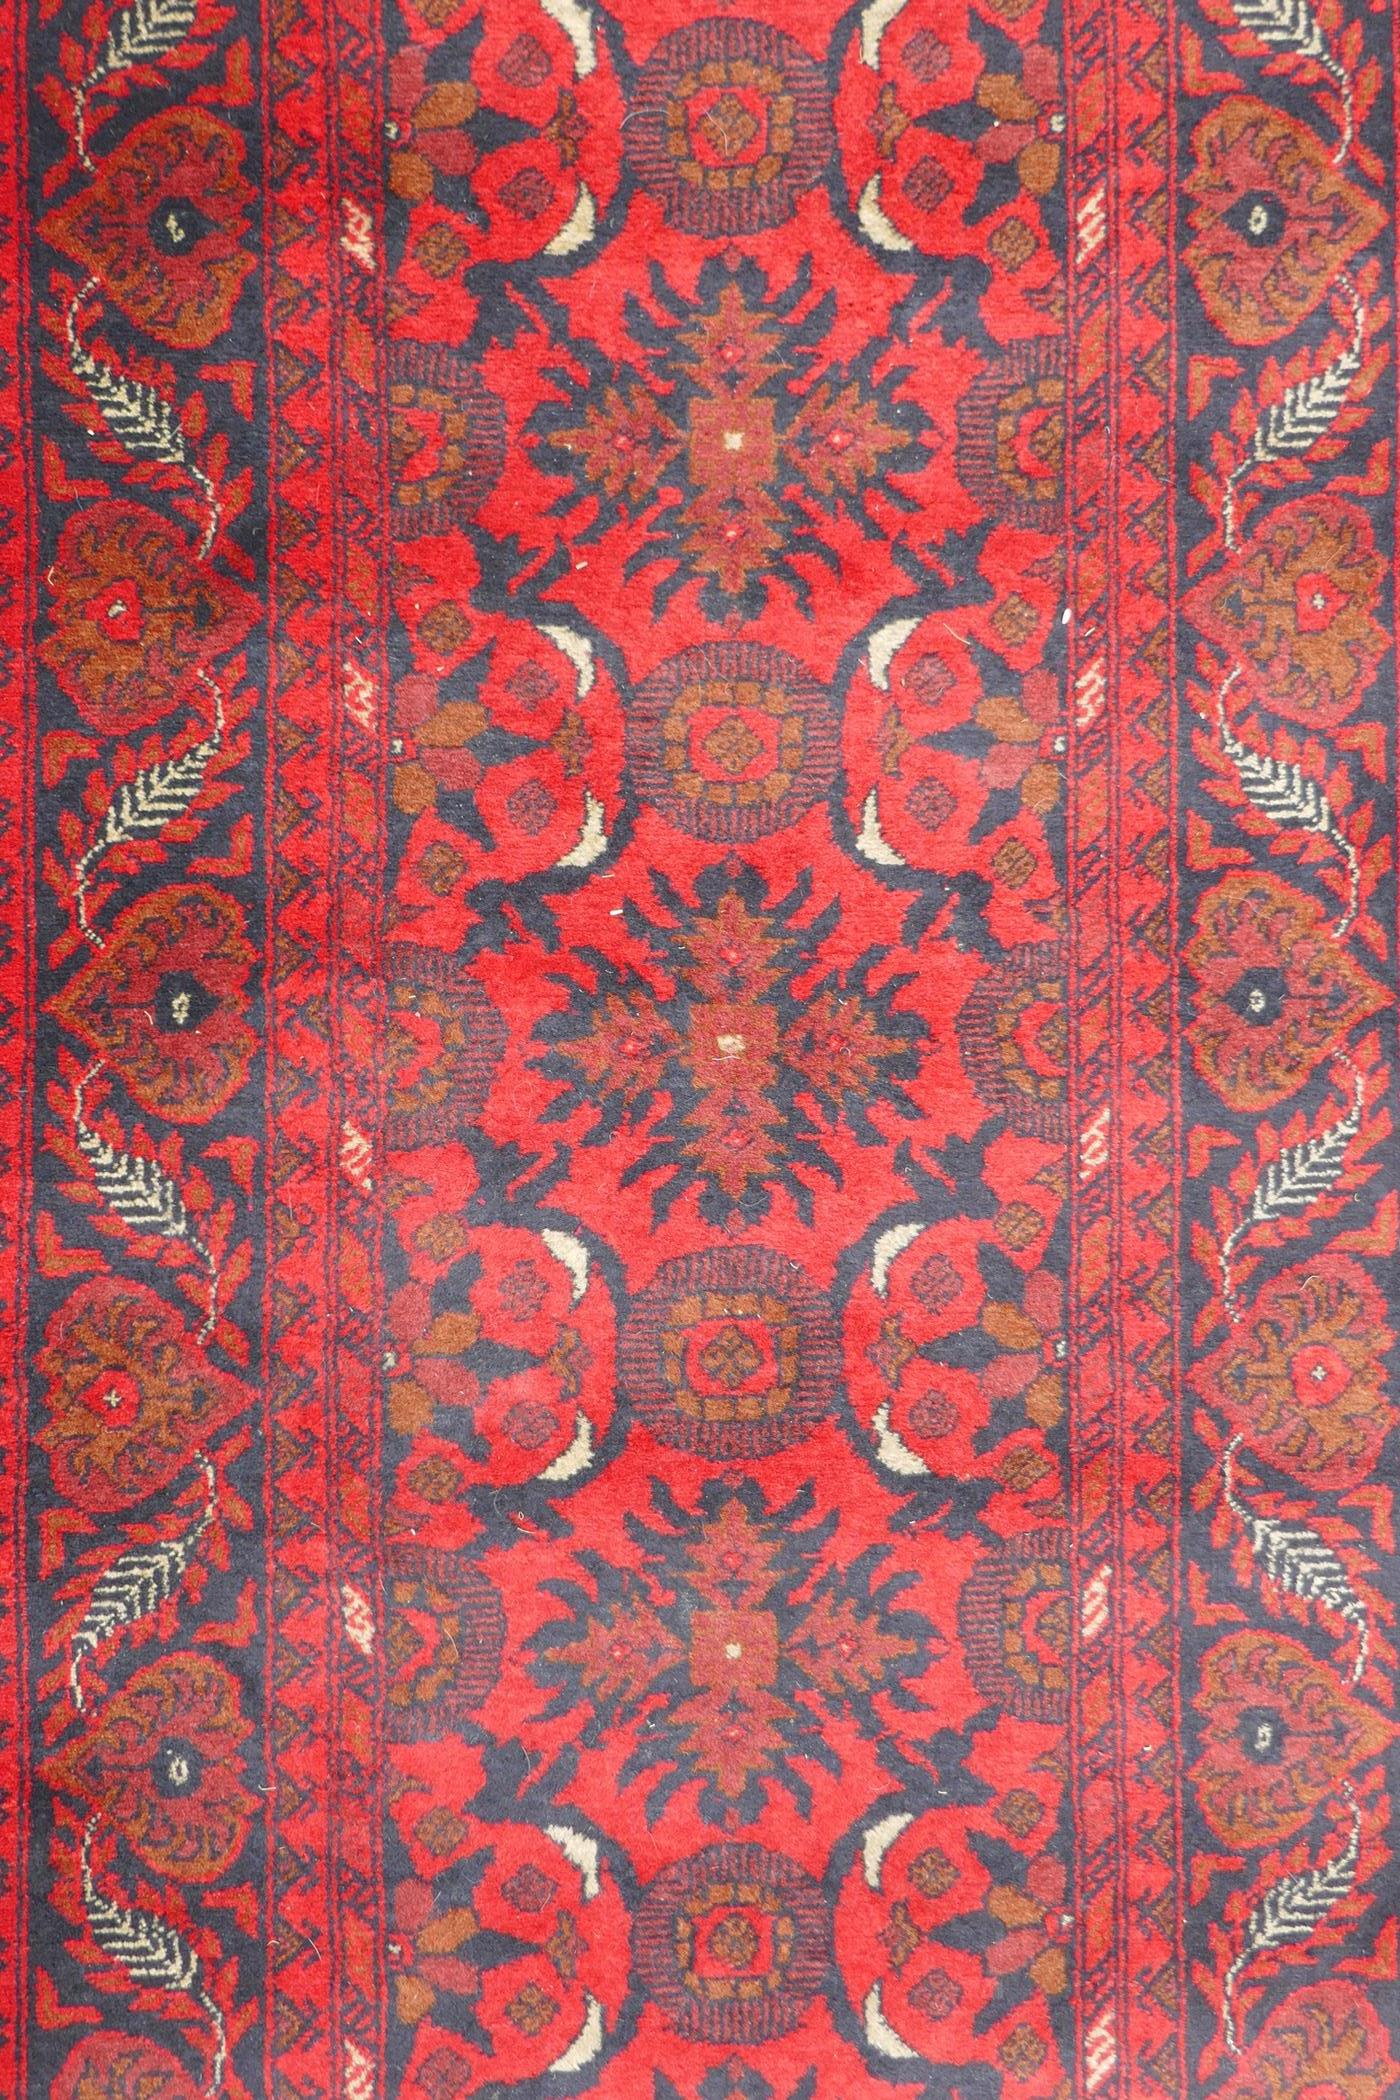 A Persian rich red ground wool runner with a floral medallion design and black borders, 33" x 116" - Image 3 of 5